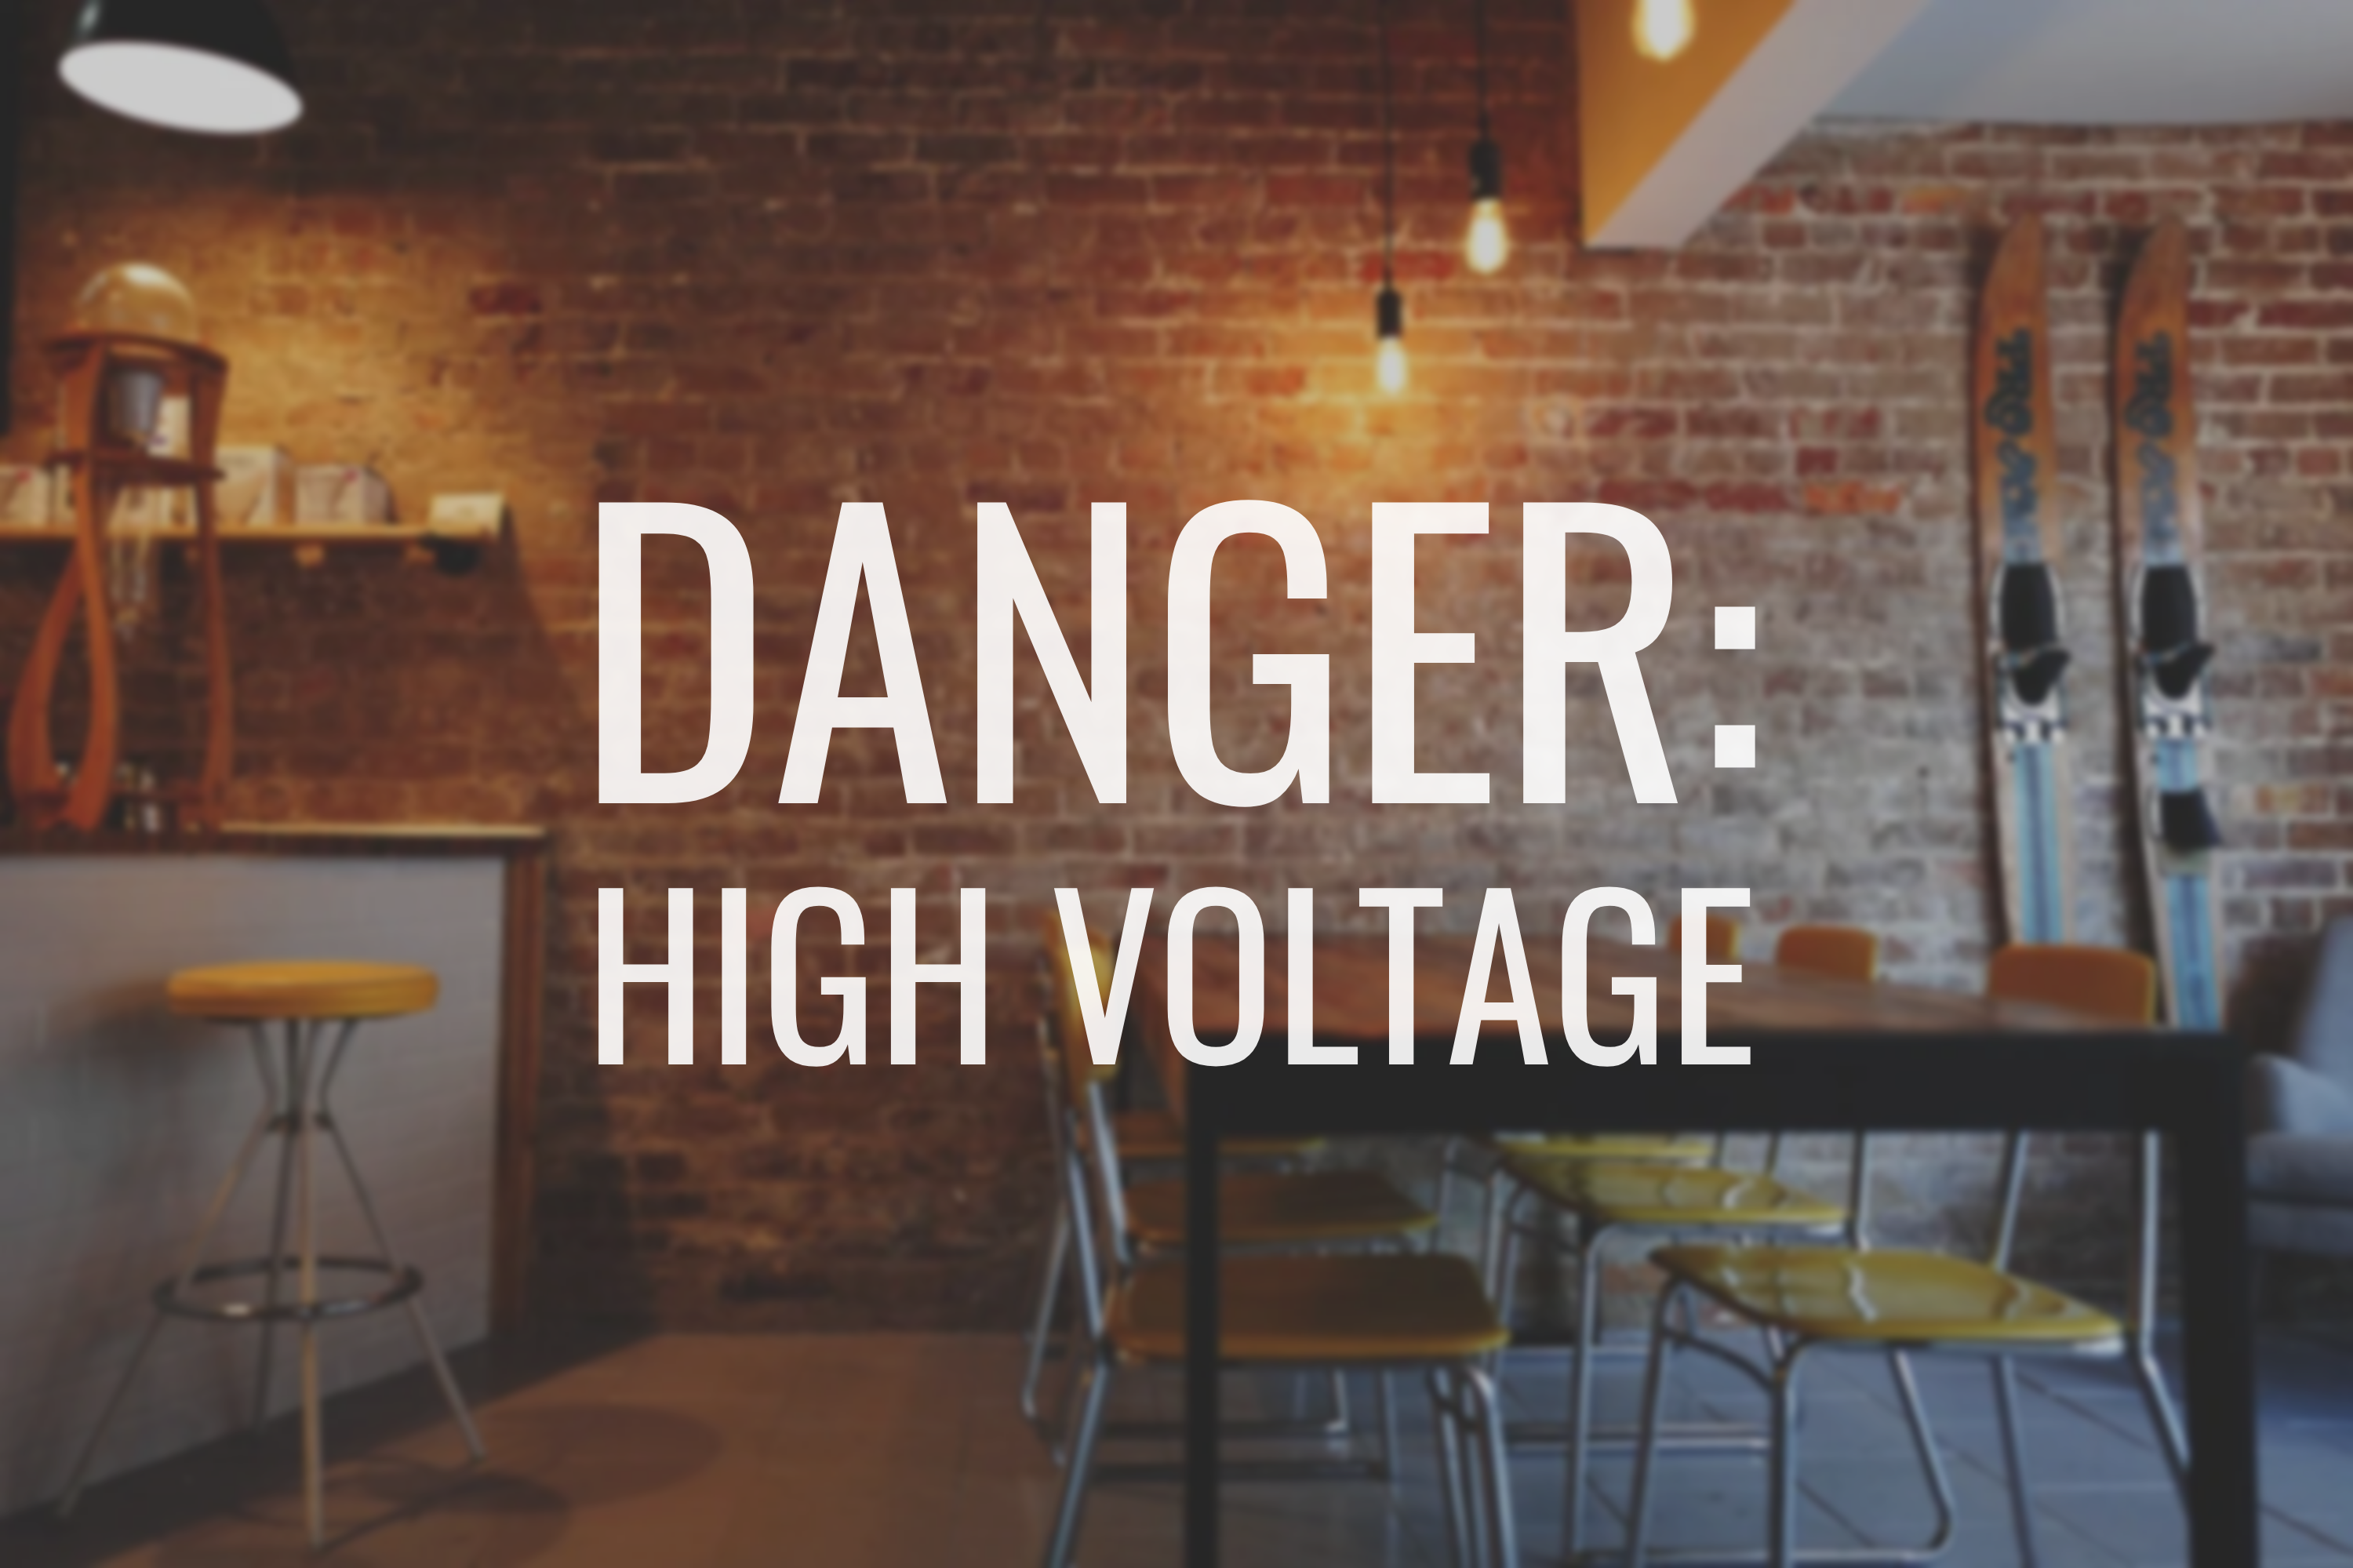 Danger High Voltage Decal - Vinyl Sticker for Businesses, Stores, Bars, Coffee Shops, Eatery, Cafeteria, Food Truck!